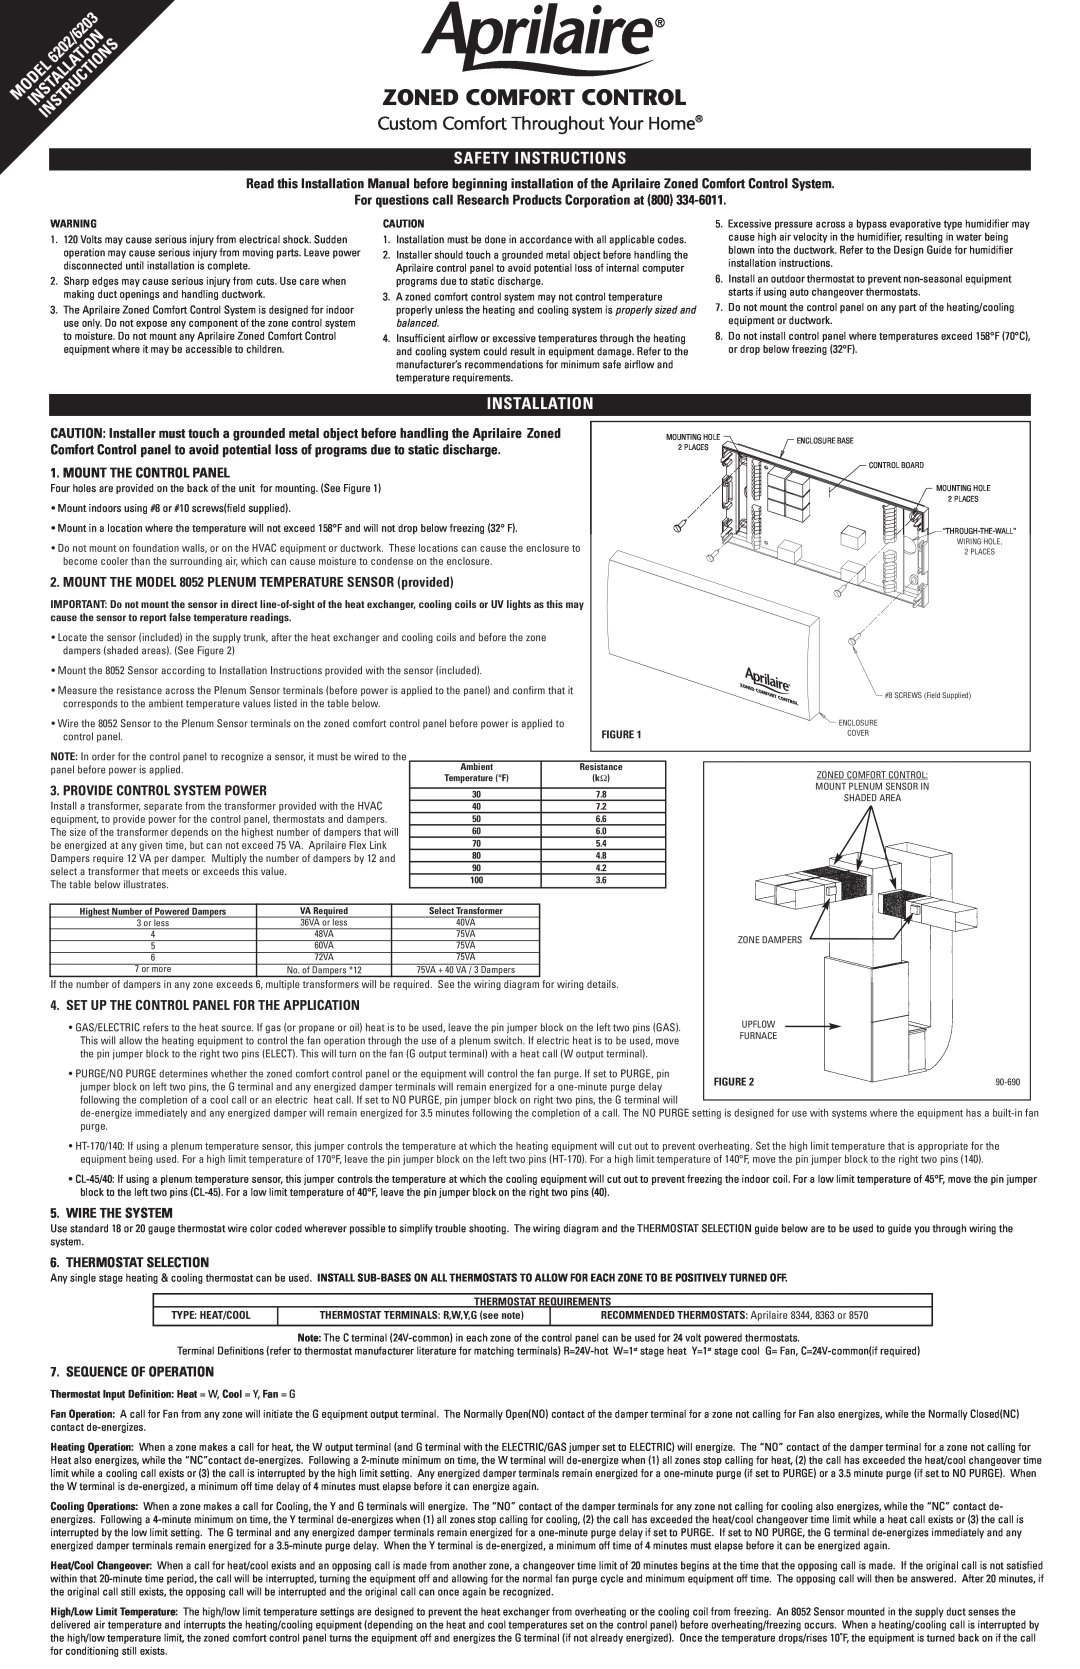 Aprilaire B2202554C installation instructions Safety Instructions, Installation, Mount The Control Panel, Wire The System 